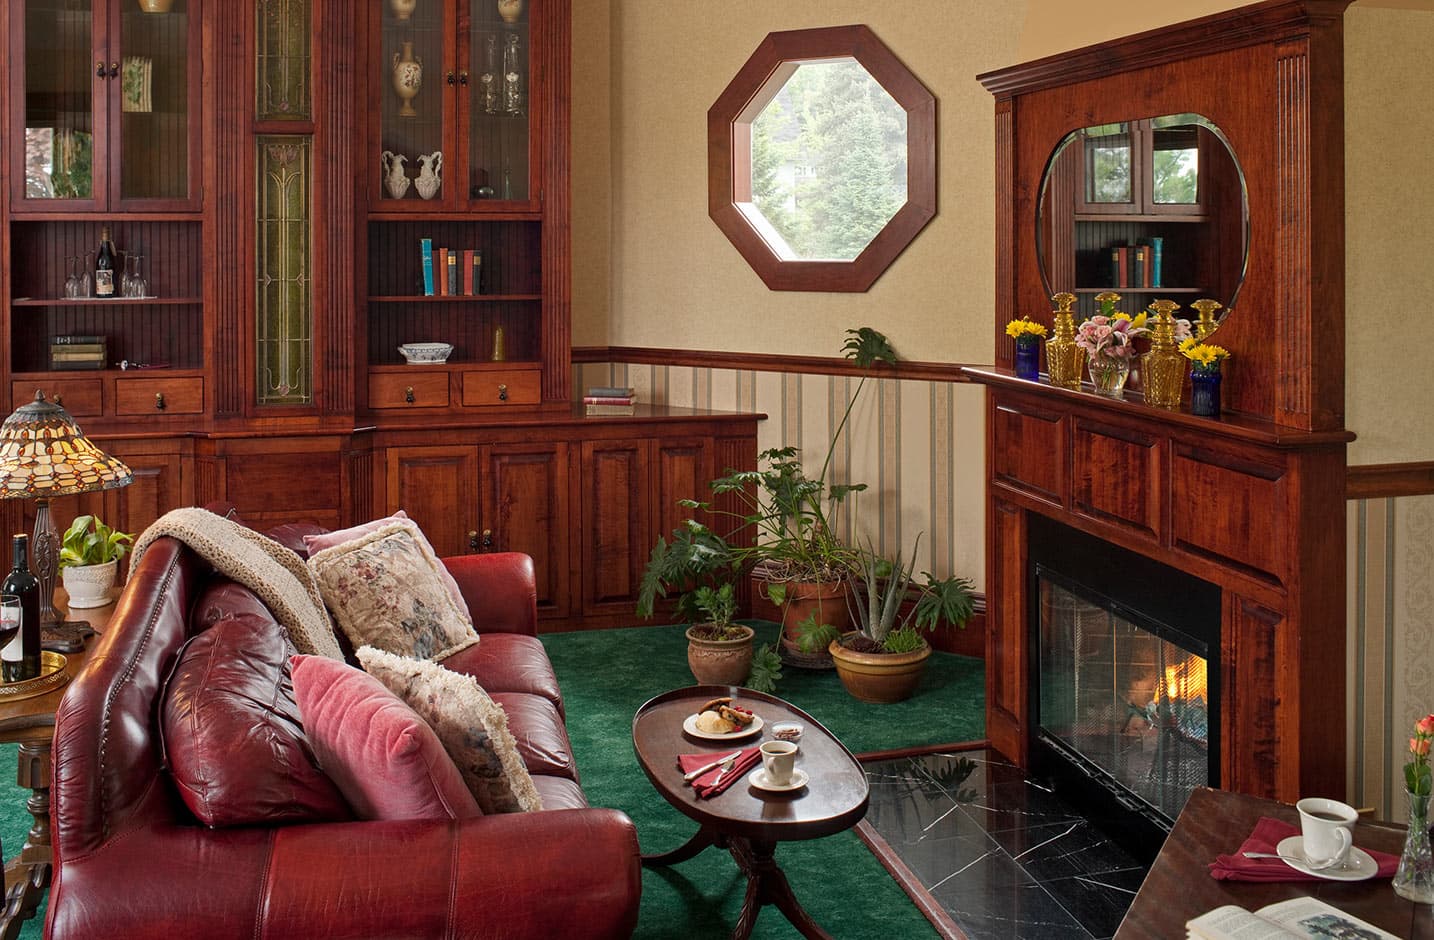 Fireplace with red leather couch and ornate wood bookshelves